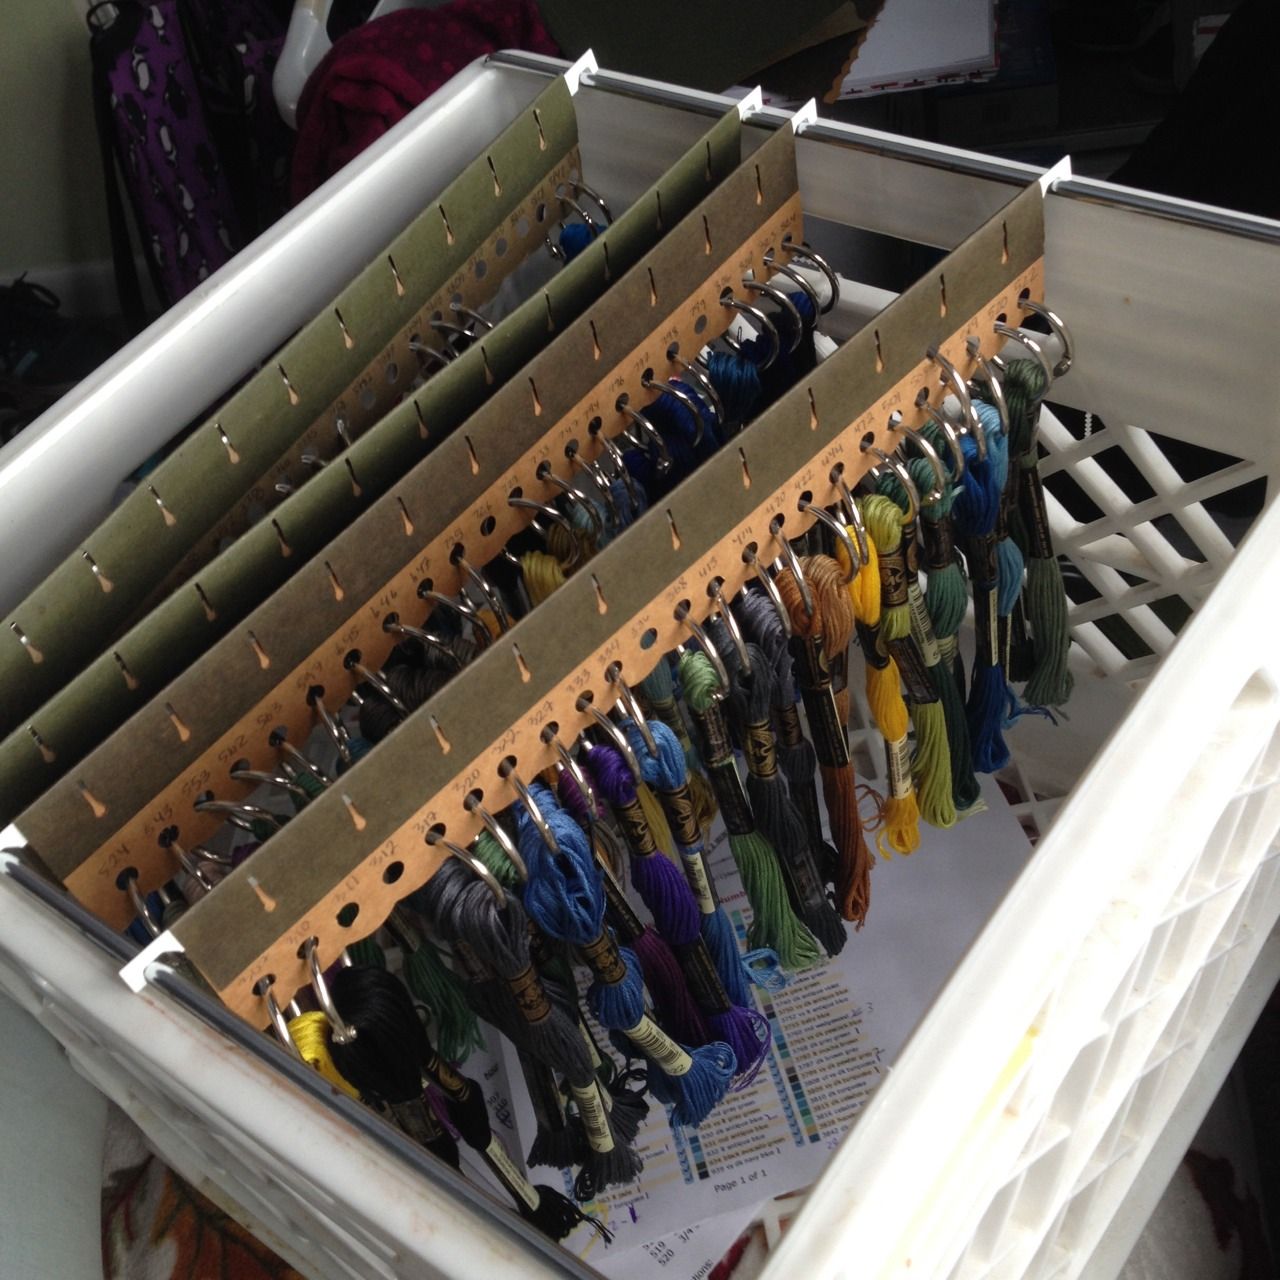 Horse Country Chic: Needlepoint Thread Storage and Organization 101